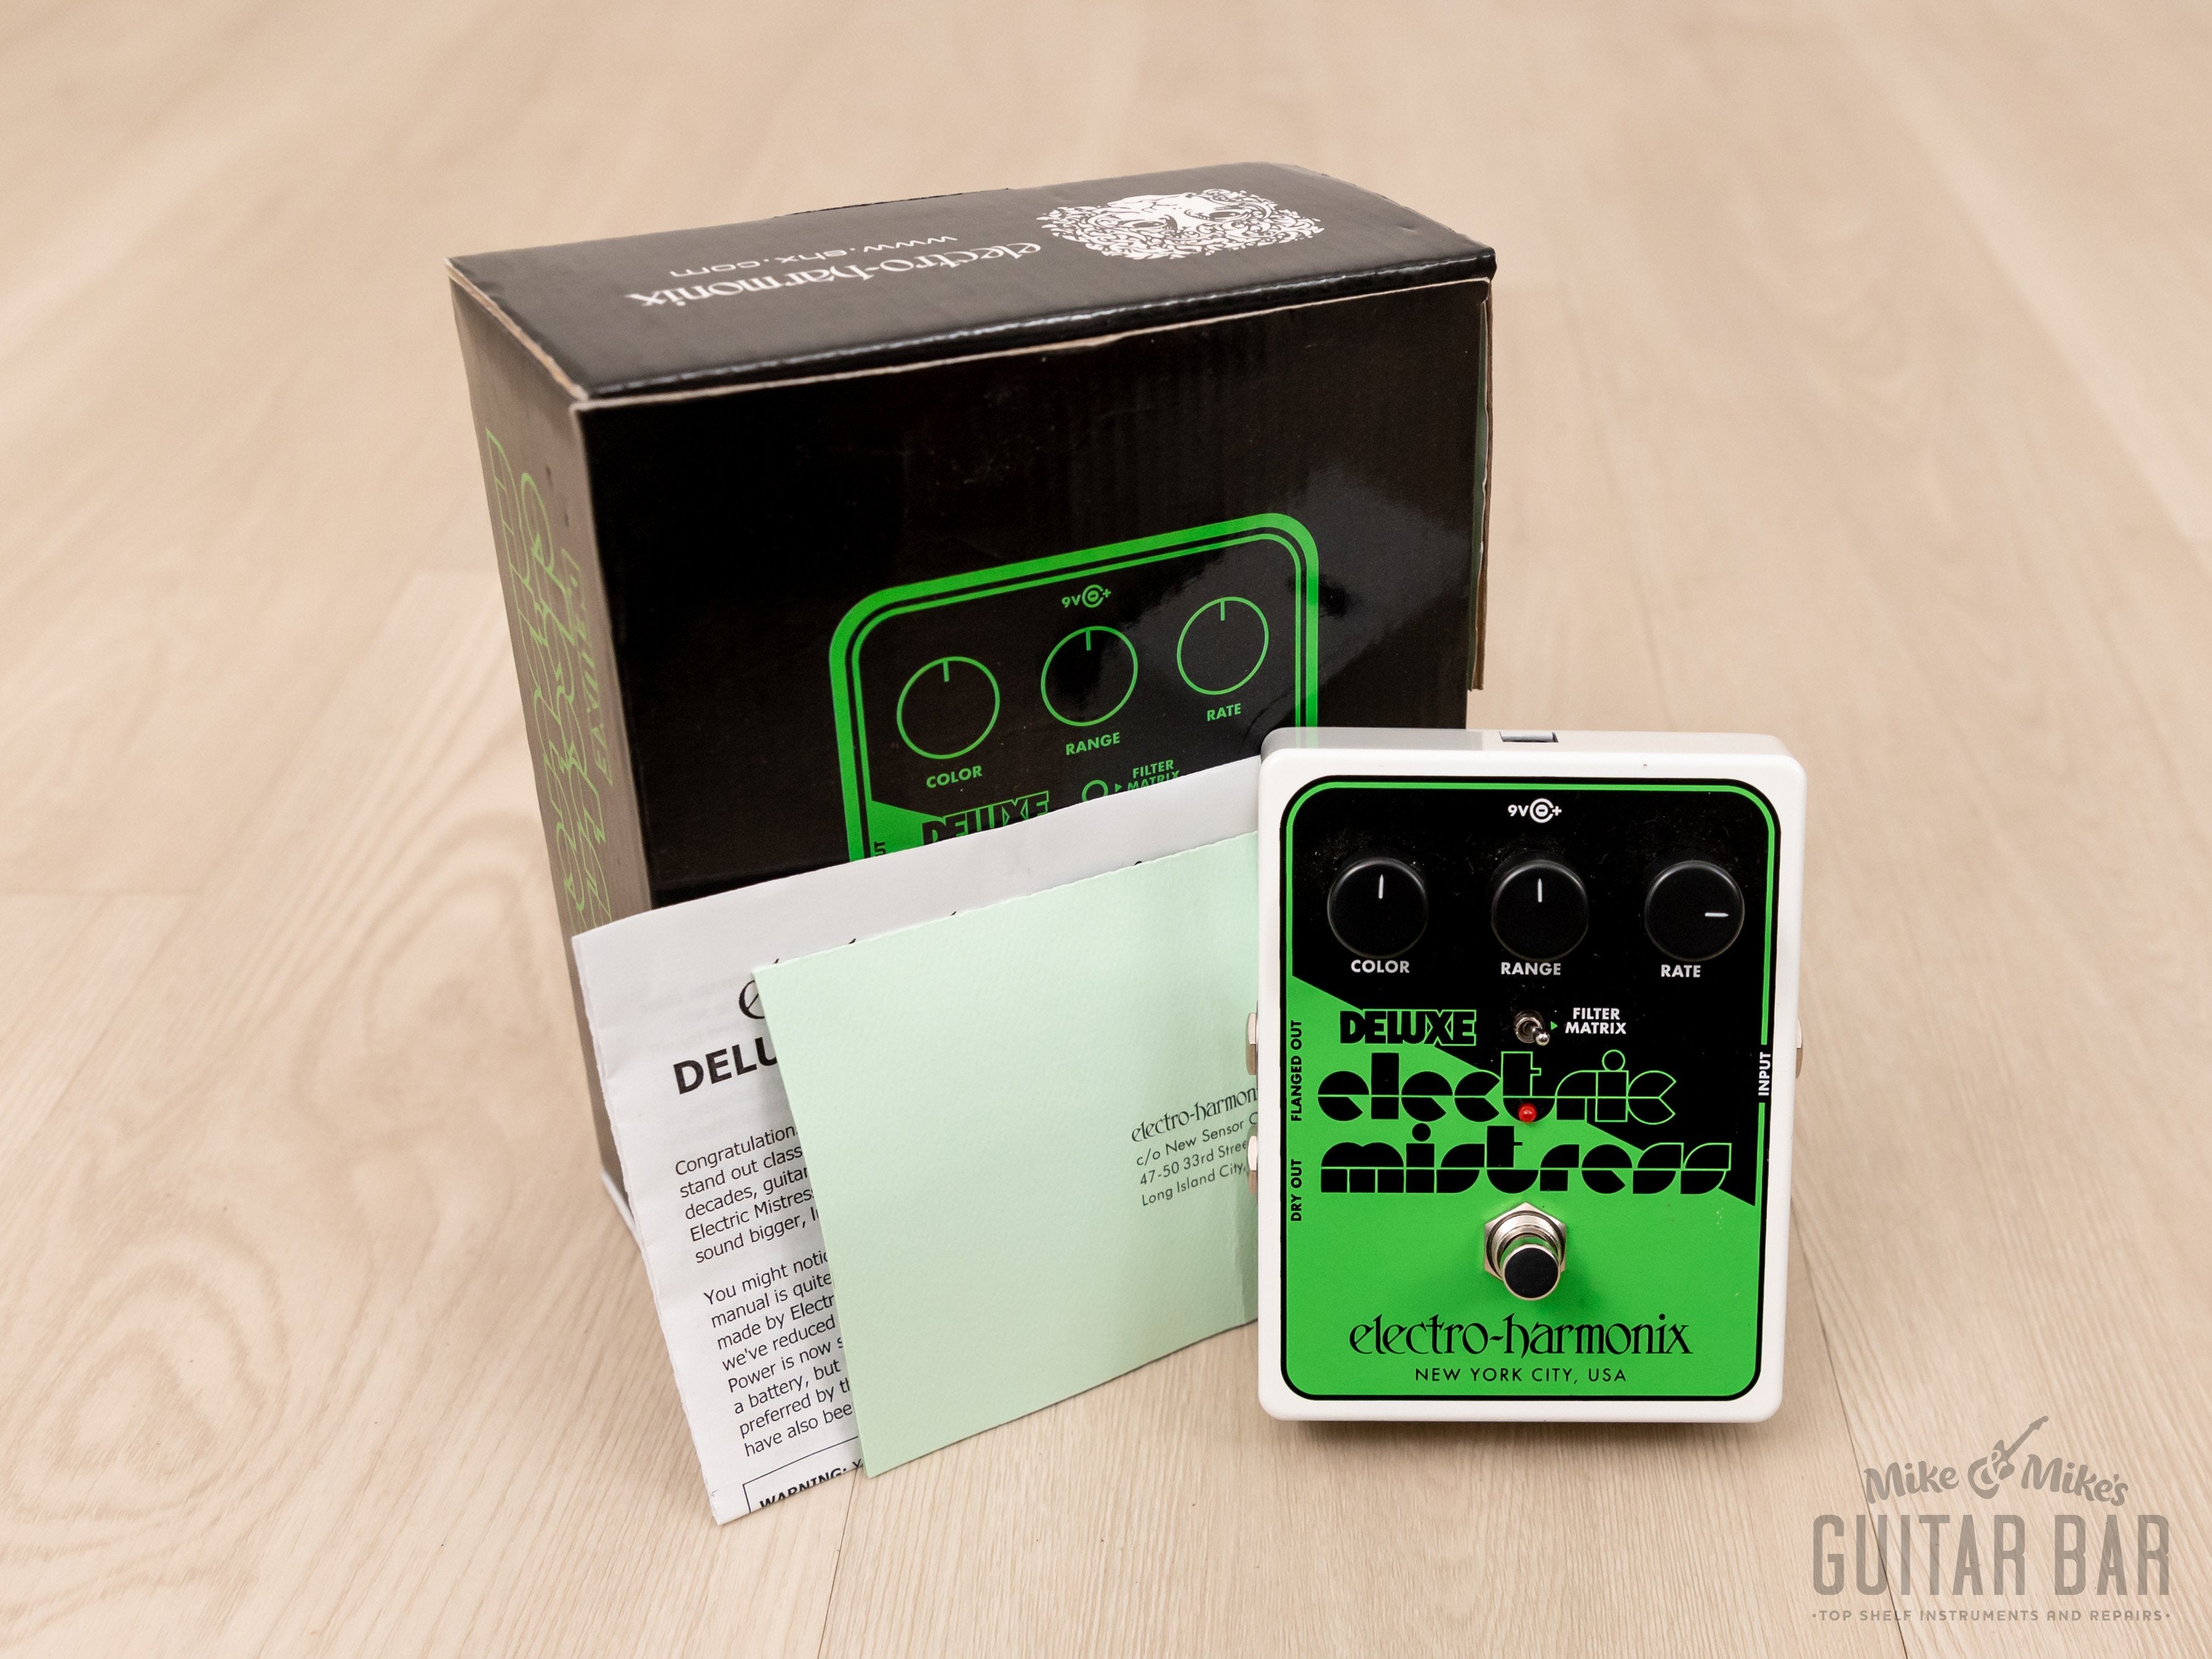 Electro Harmonix Deluxe Electric Mistress Flanger/Filter Matrix Guitar Effects Pedal w/ Box, Power Supply